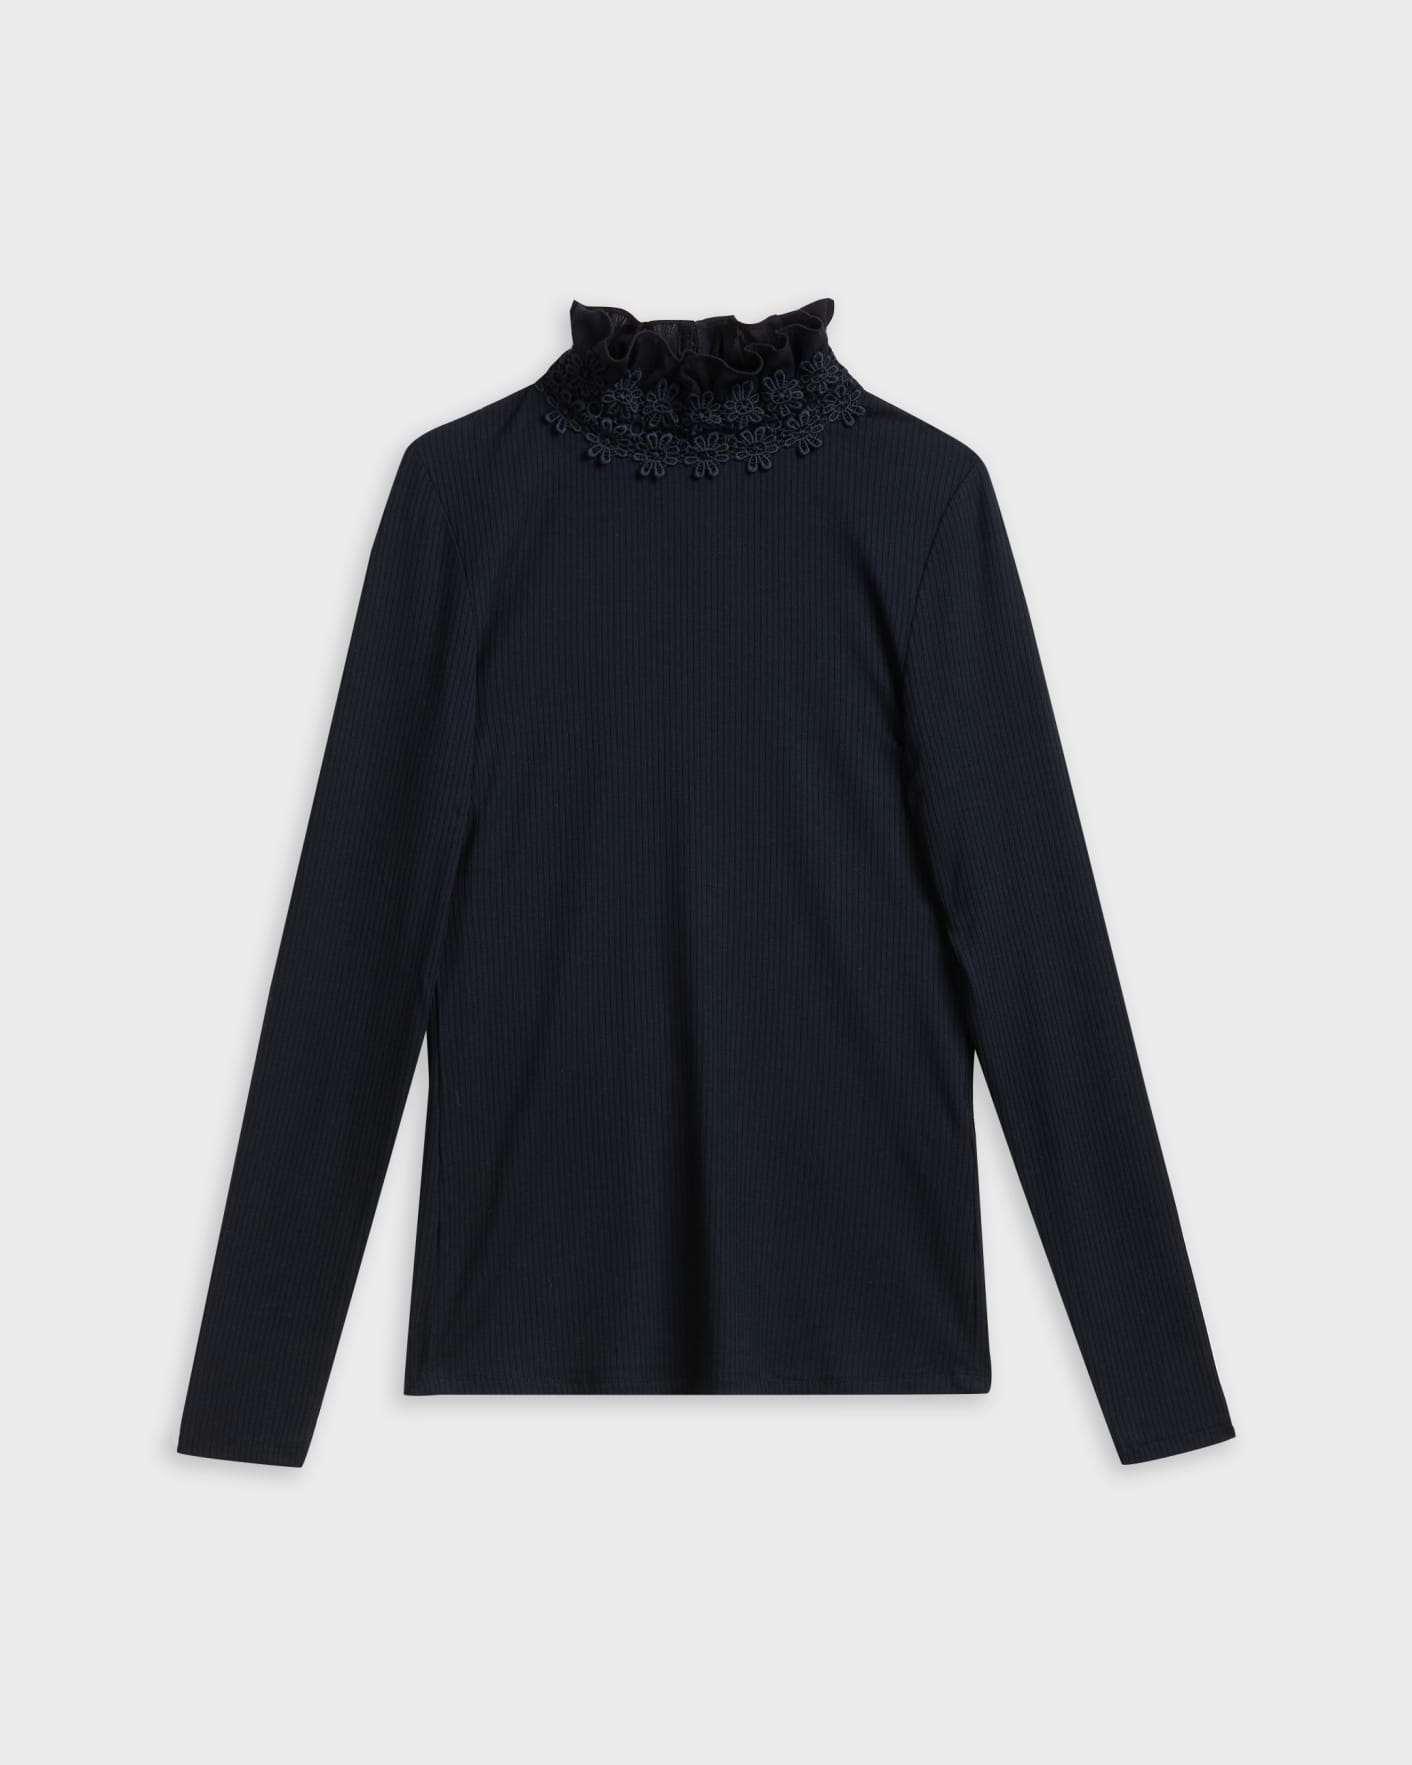 Navy Rib Top With Floral Detail Neck Ted Baker